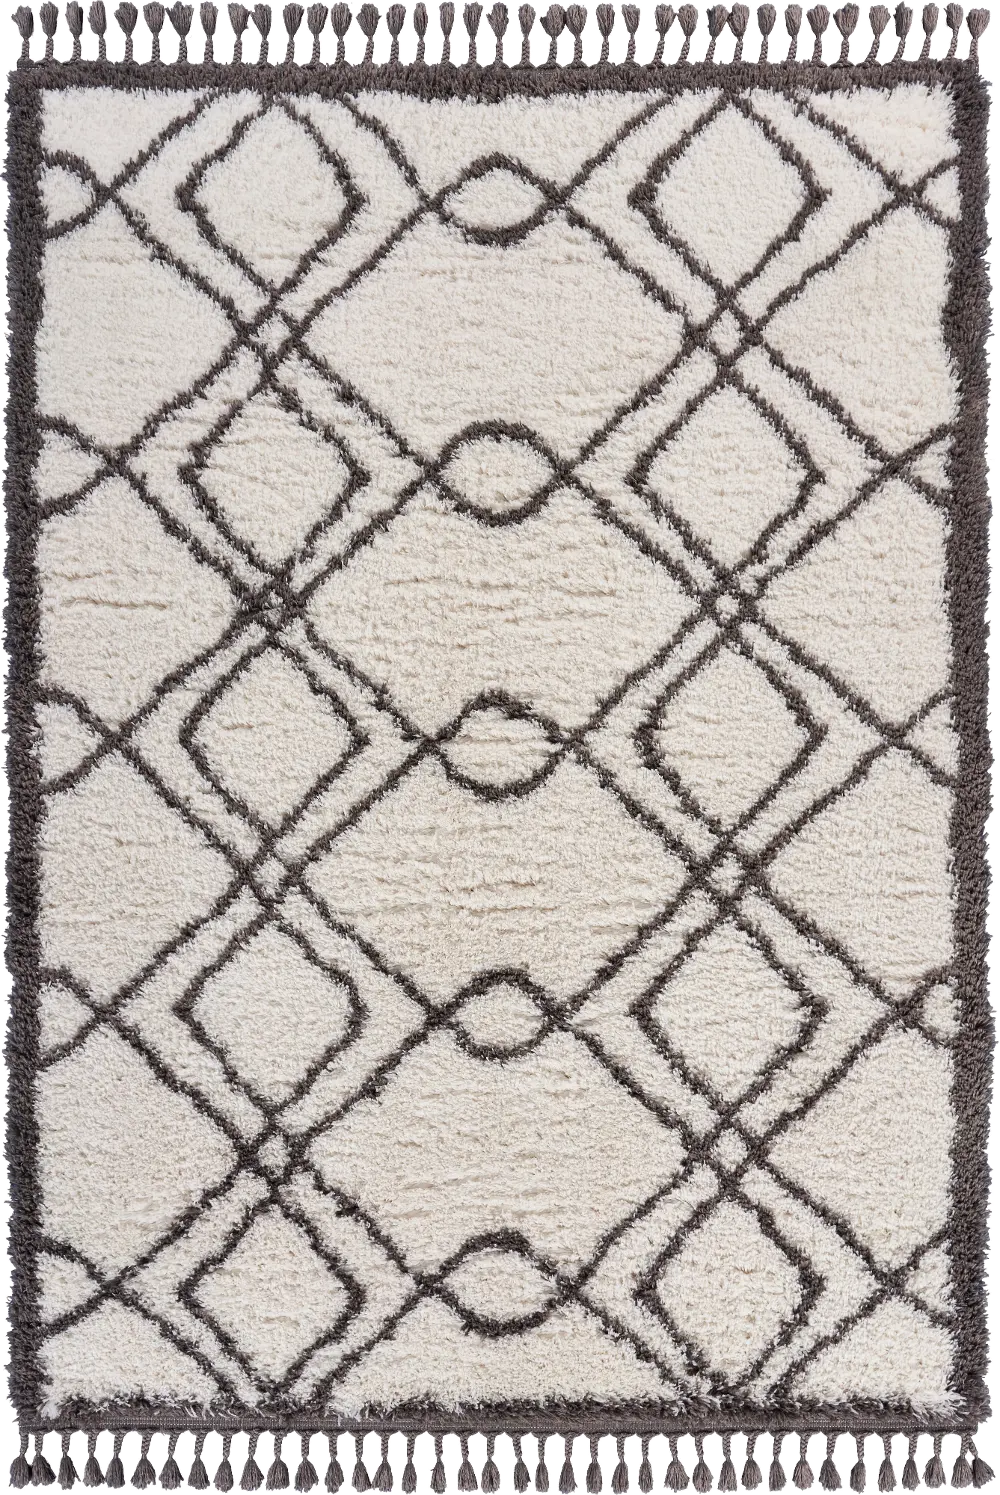 8 x 10 Large White and Gray Area Rug - Outlander-1